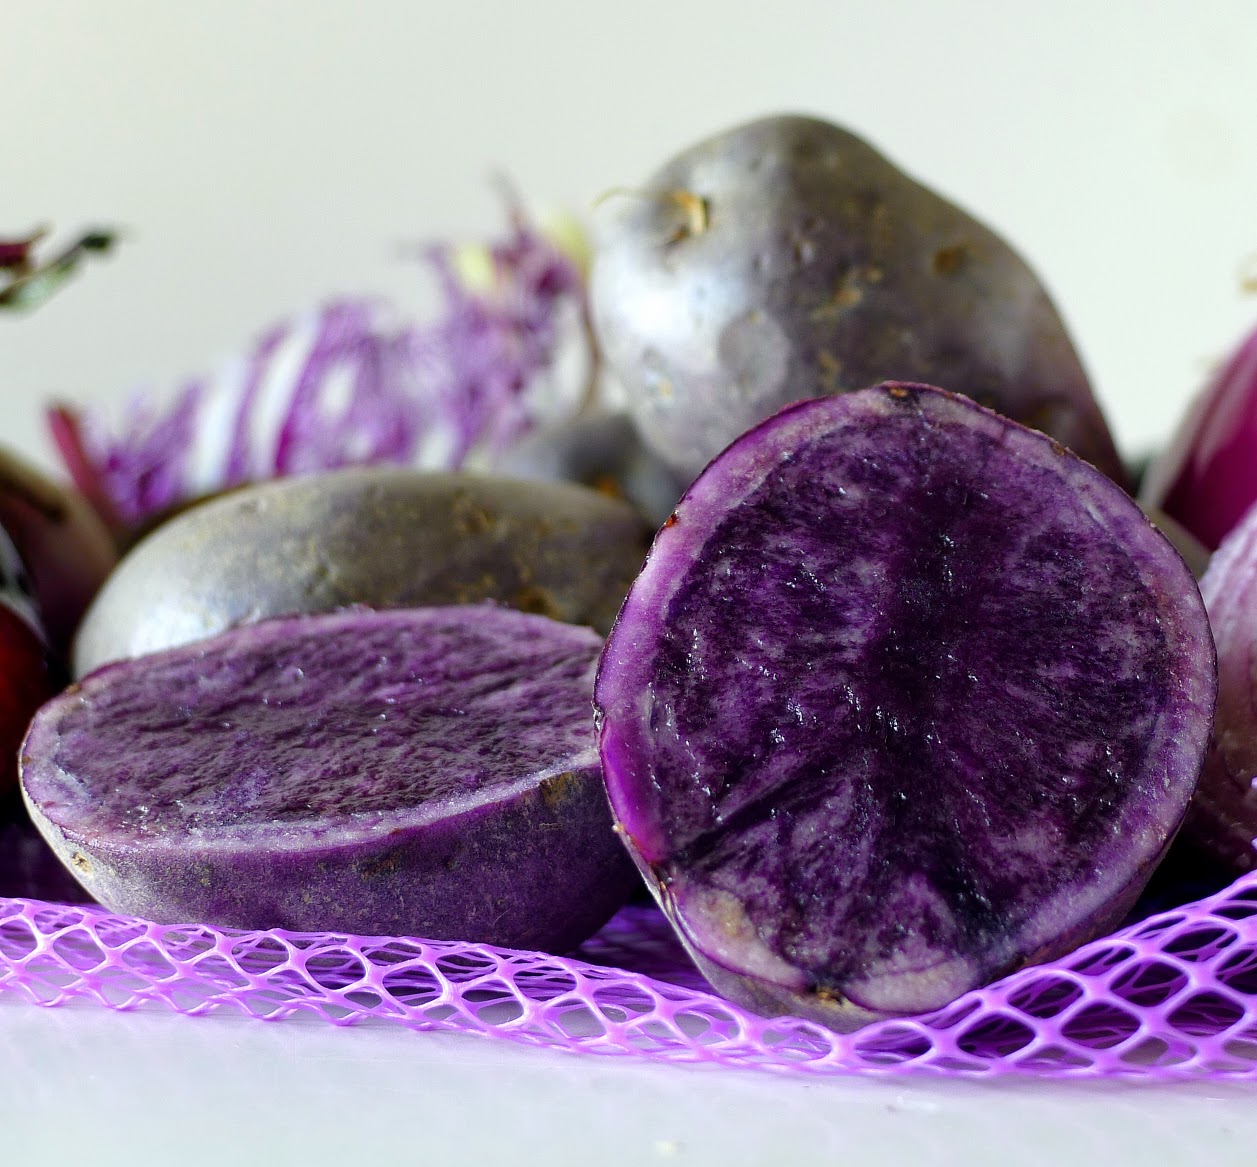 What Are Purple Potatoes And What Do They Taste Like?